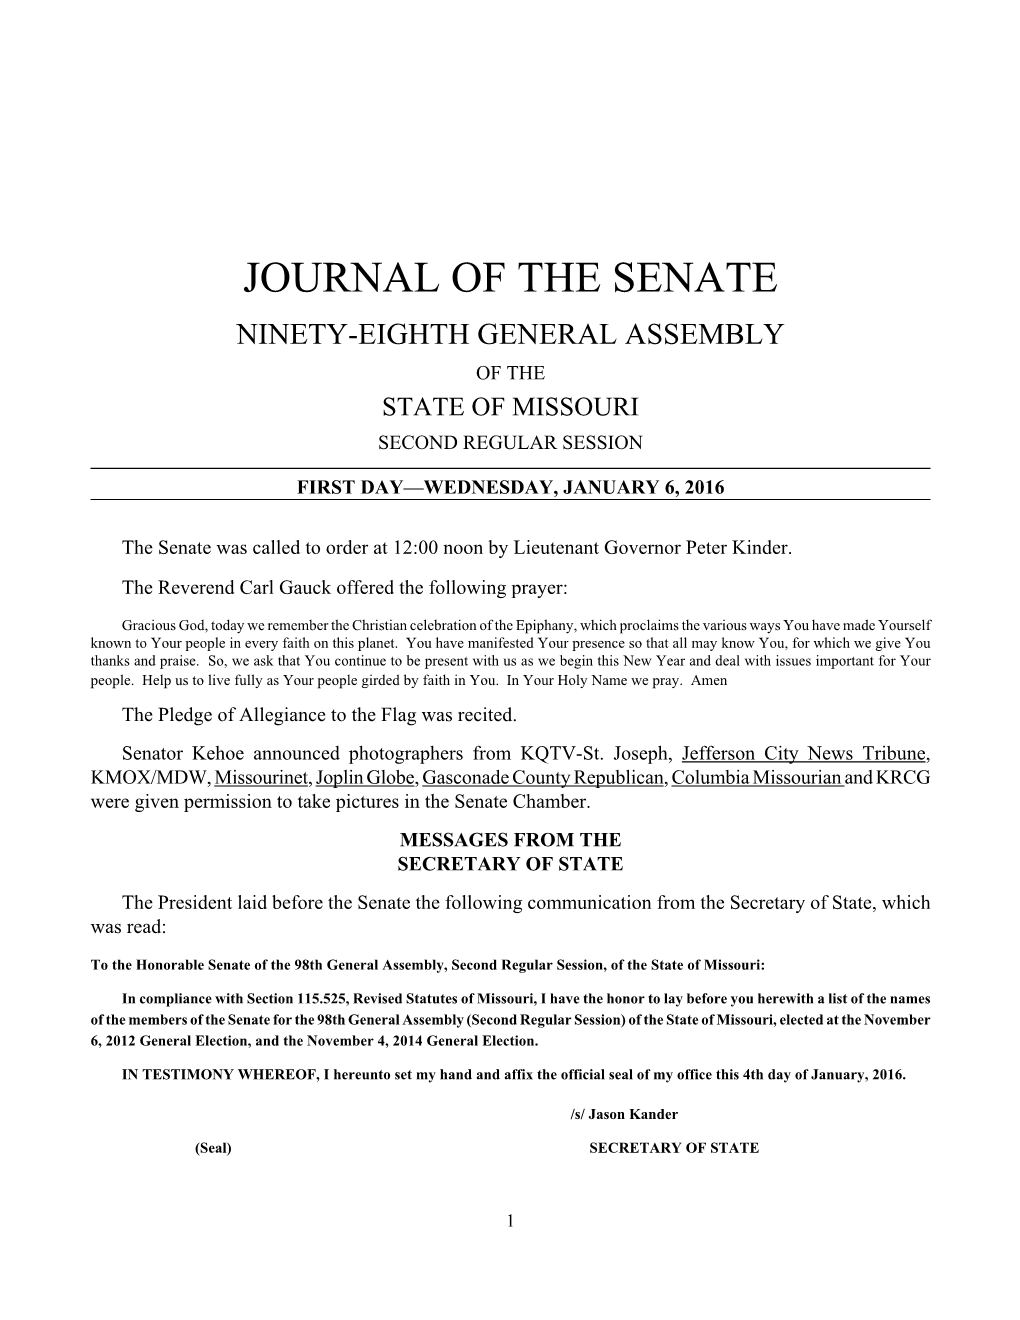 Journal of the Senate Ninety-Eighth General Assembly of the State of Missouri Second Regular Session